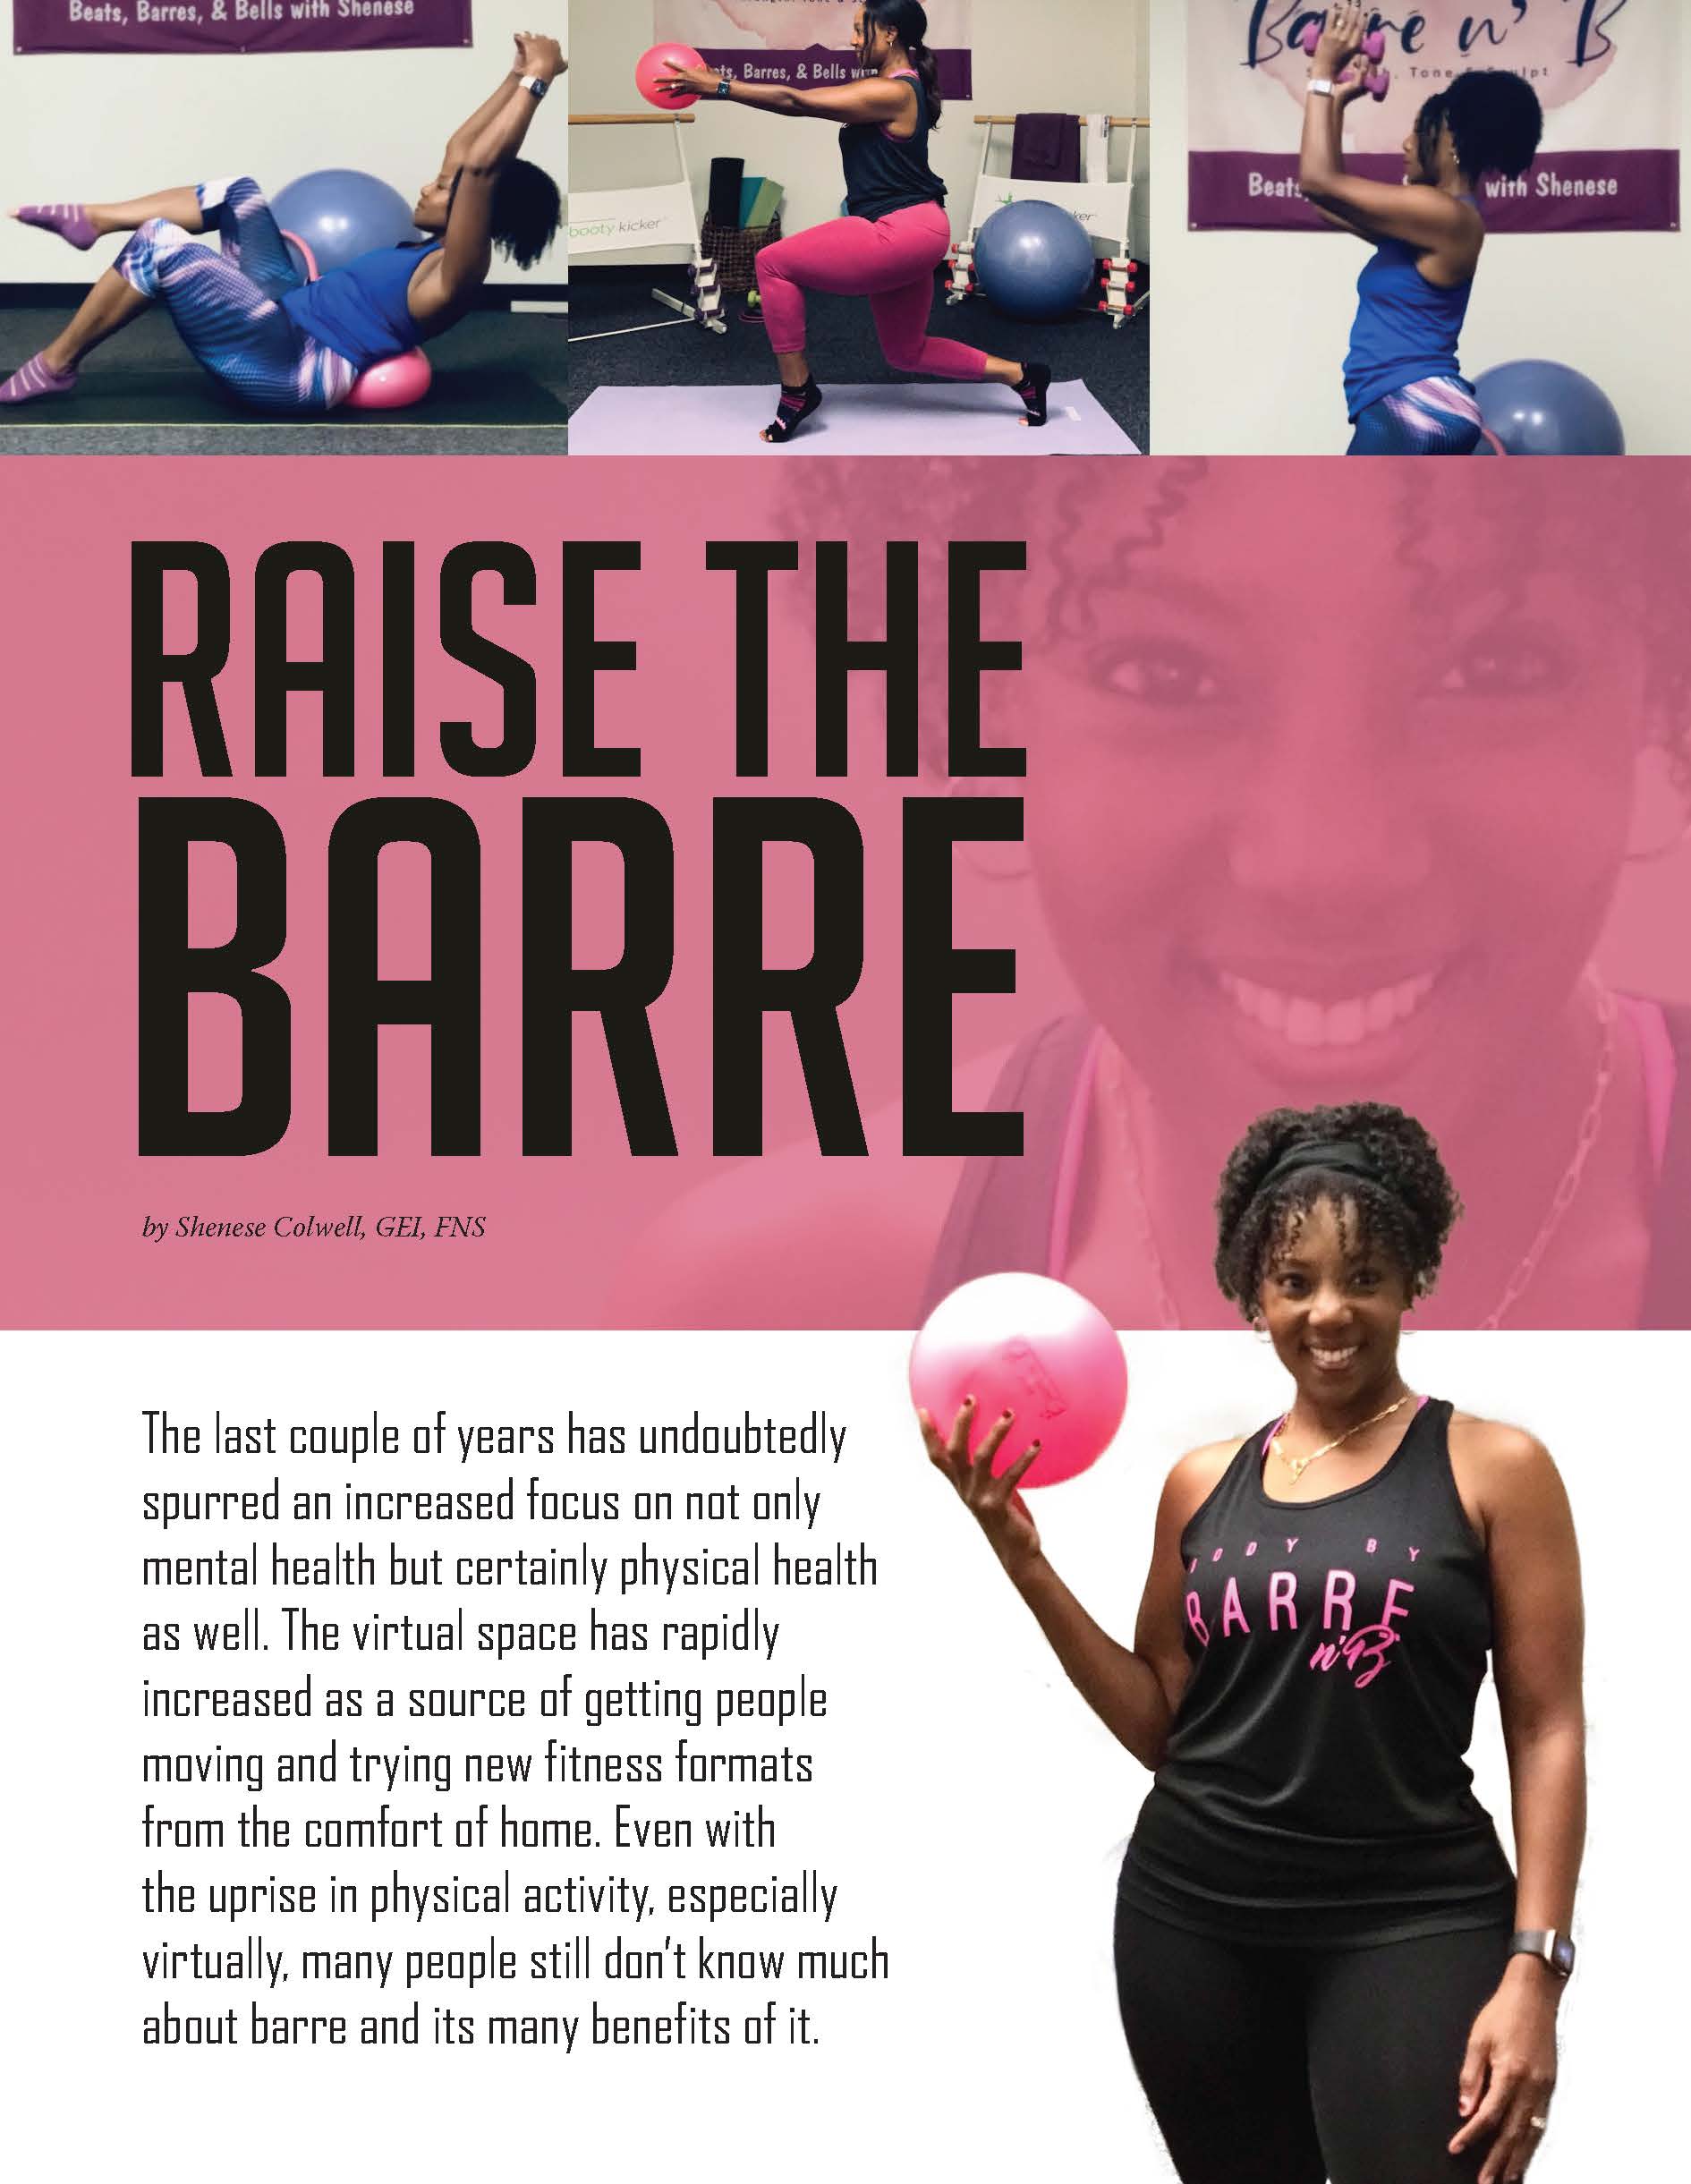 Raise the Bar with the Barre Workout